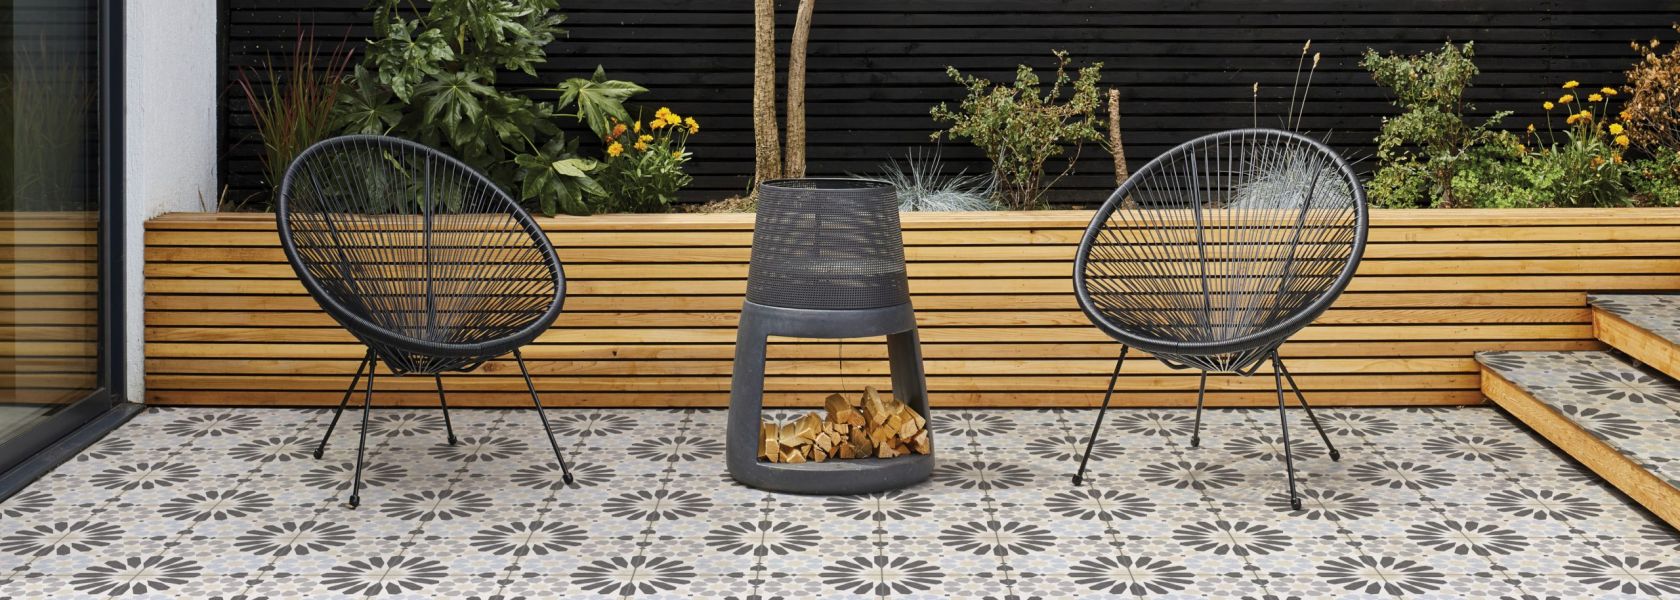 An outdoor seating area with 2 chairs, fire, tiled flooring and wooden plant box and background wall.